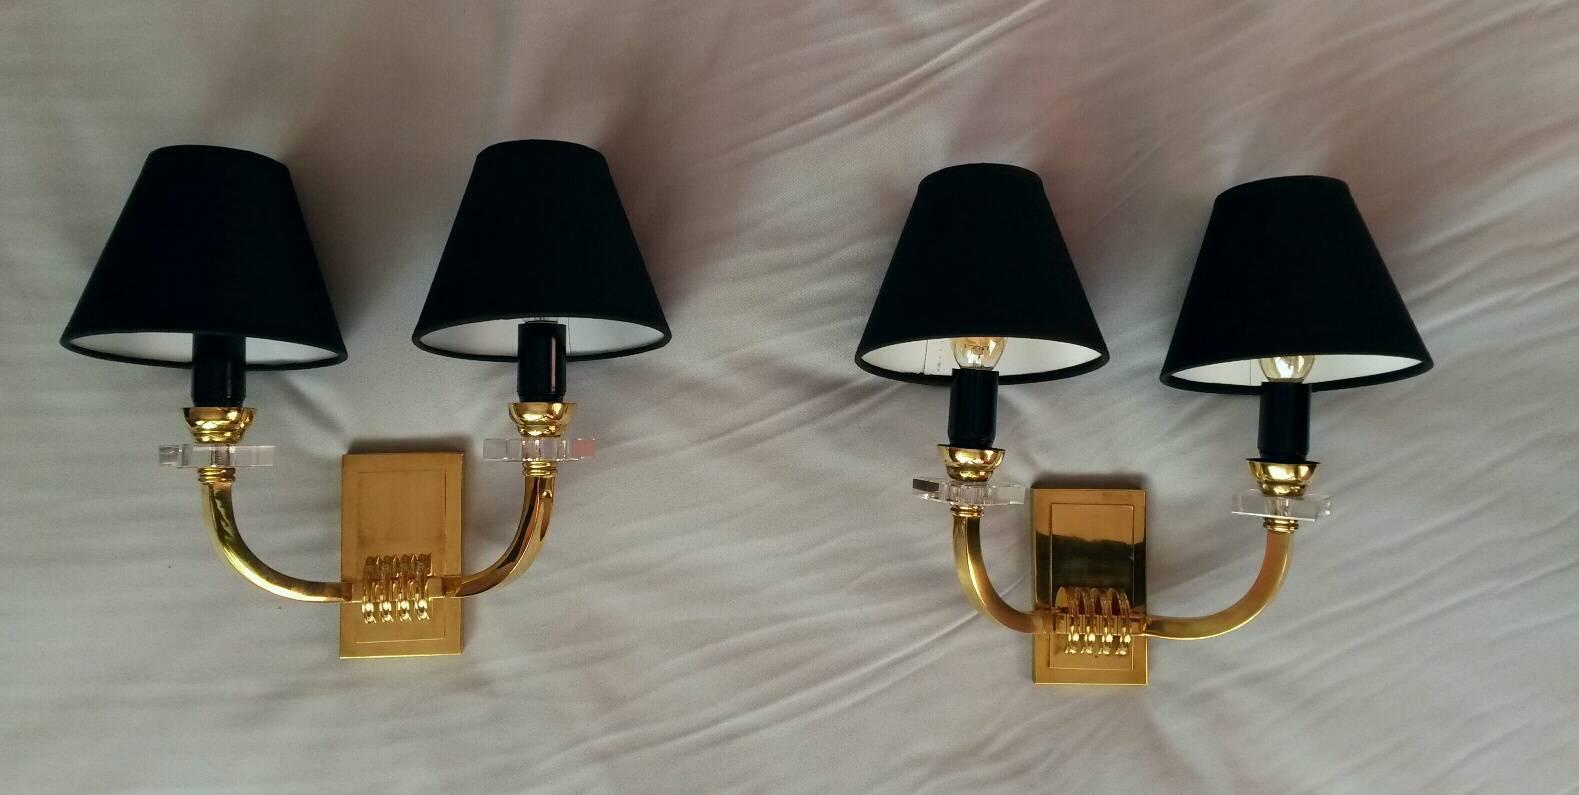 Very elegant set of two pairs in gilt bronze and glass wall sconces in the French neoclassical style of the 1950s by Jacques Adnet.
The sconces are in very good condition, new wired and suitable for US standards.
New black Cotton shades.
40 watts